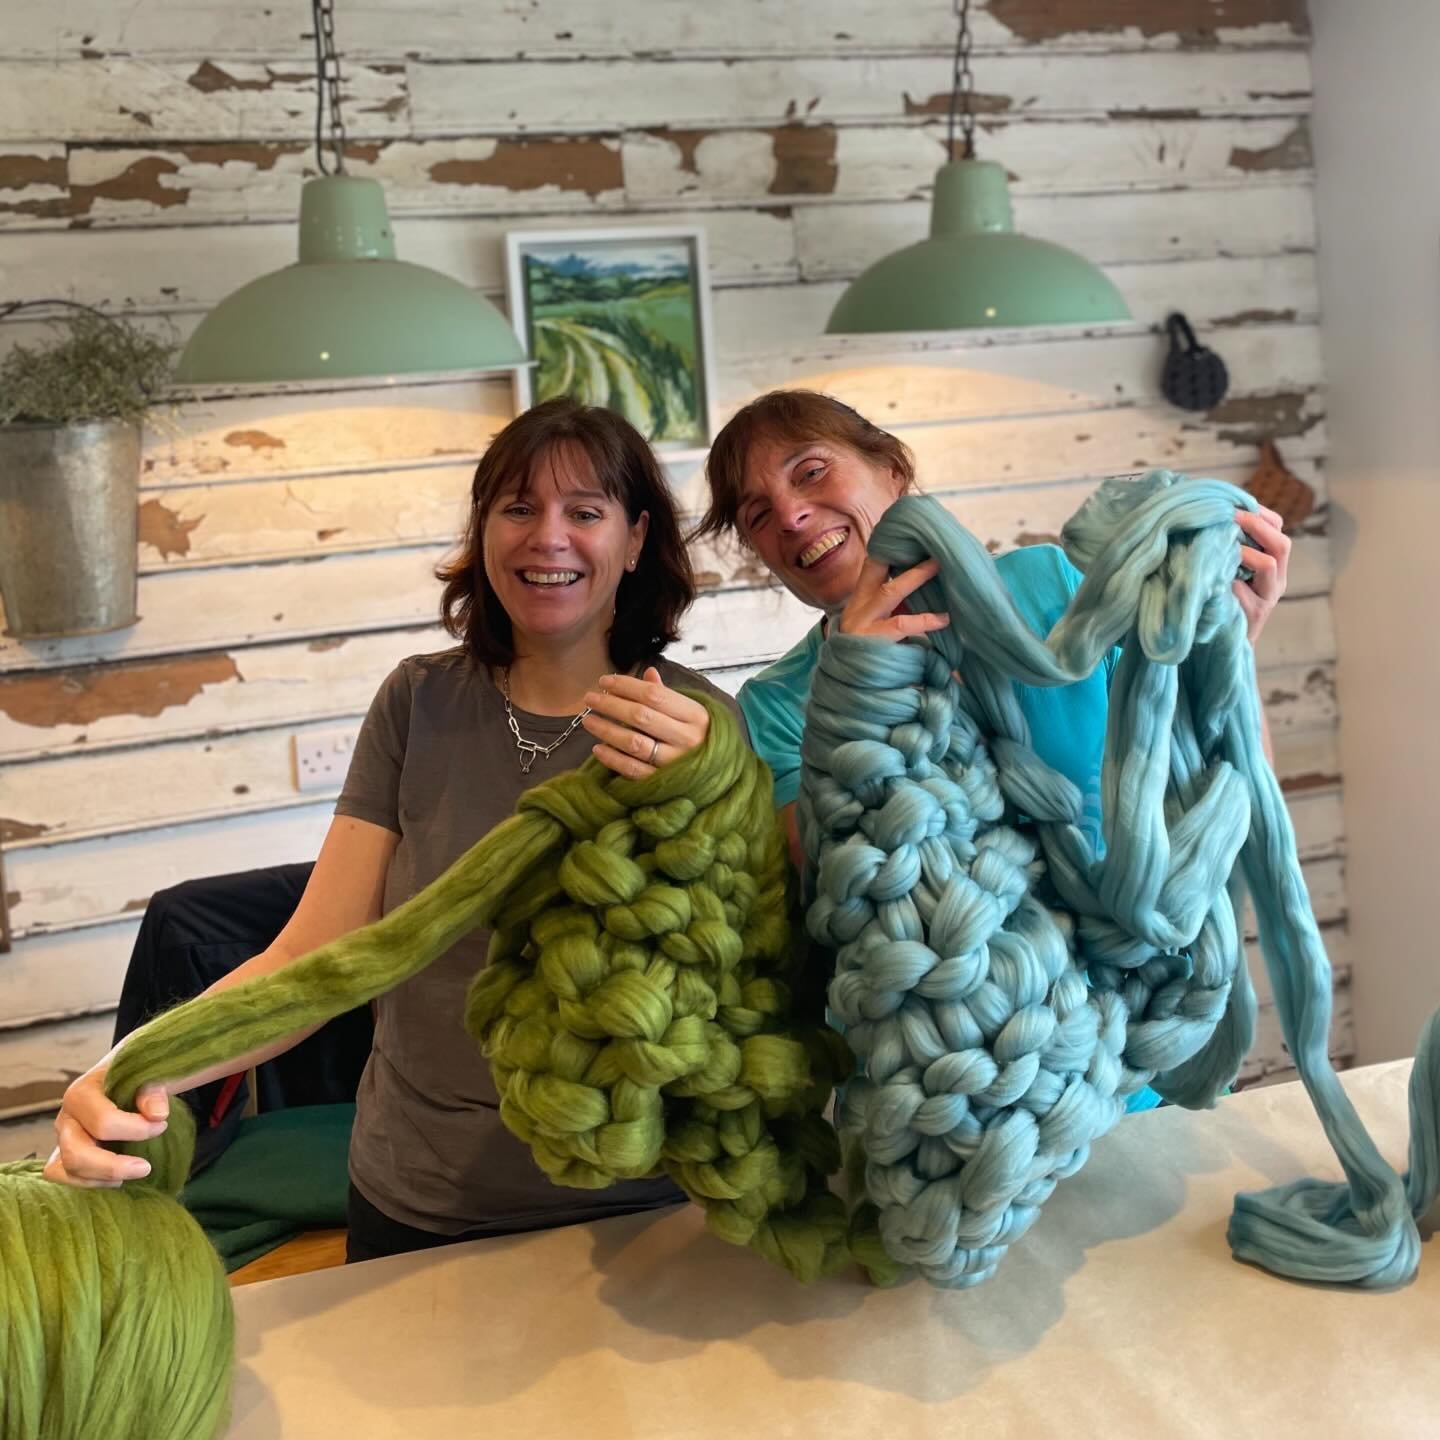 I love this joyful image of Aly &amp; Anne ARM KNITTING @pitfieldbarnflowers ! 

This is our most popular workshop, everyone can quickly learn the skills to create these cosy blankets &amp; using their arms as needles ! 

Did you know, we also have k